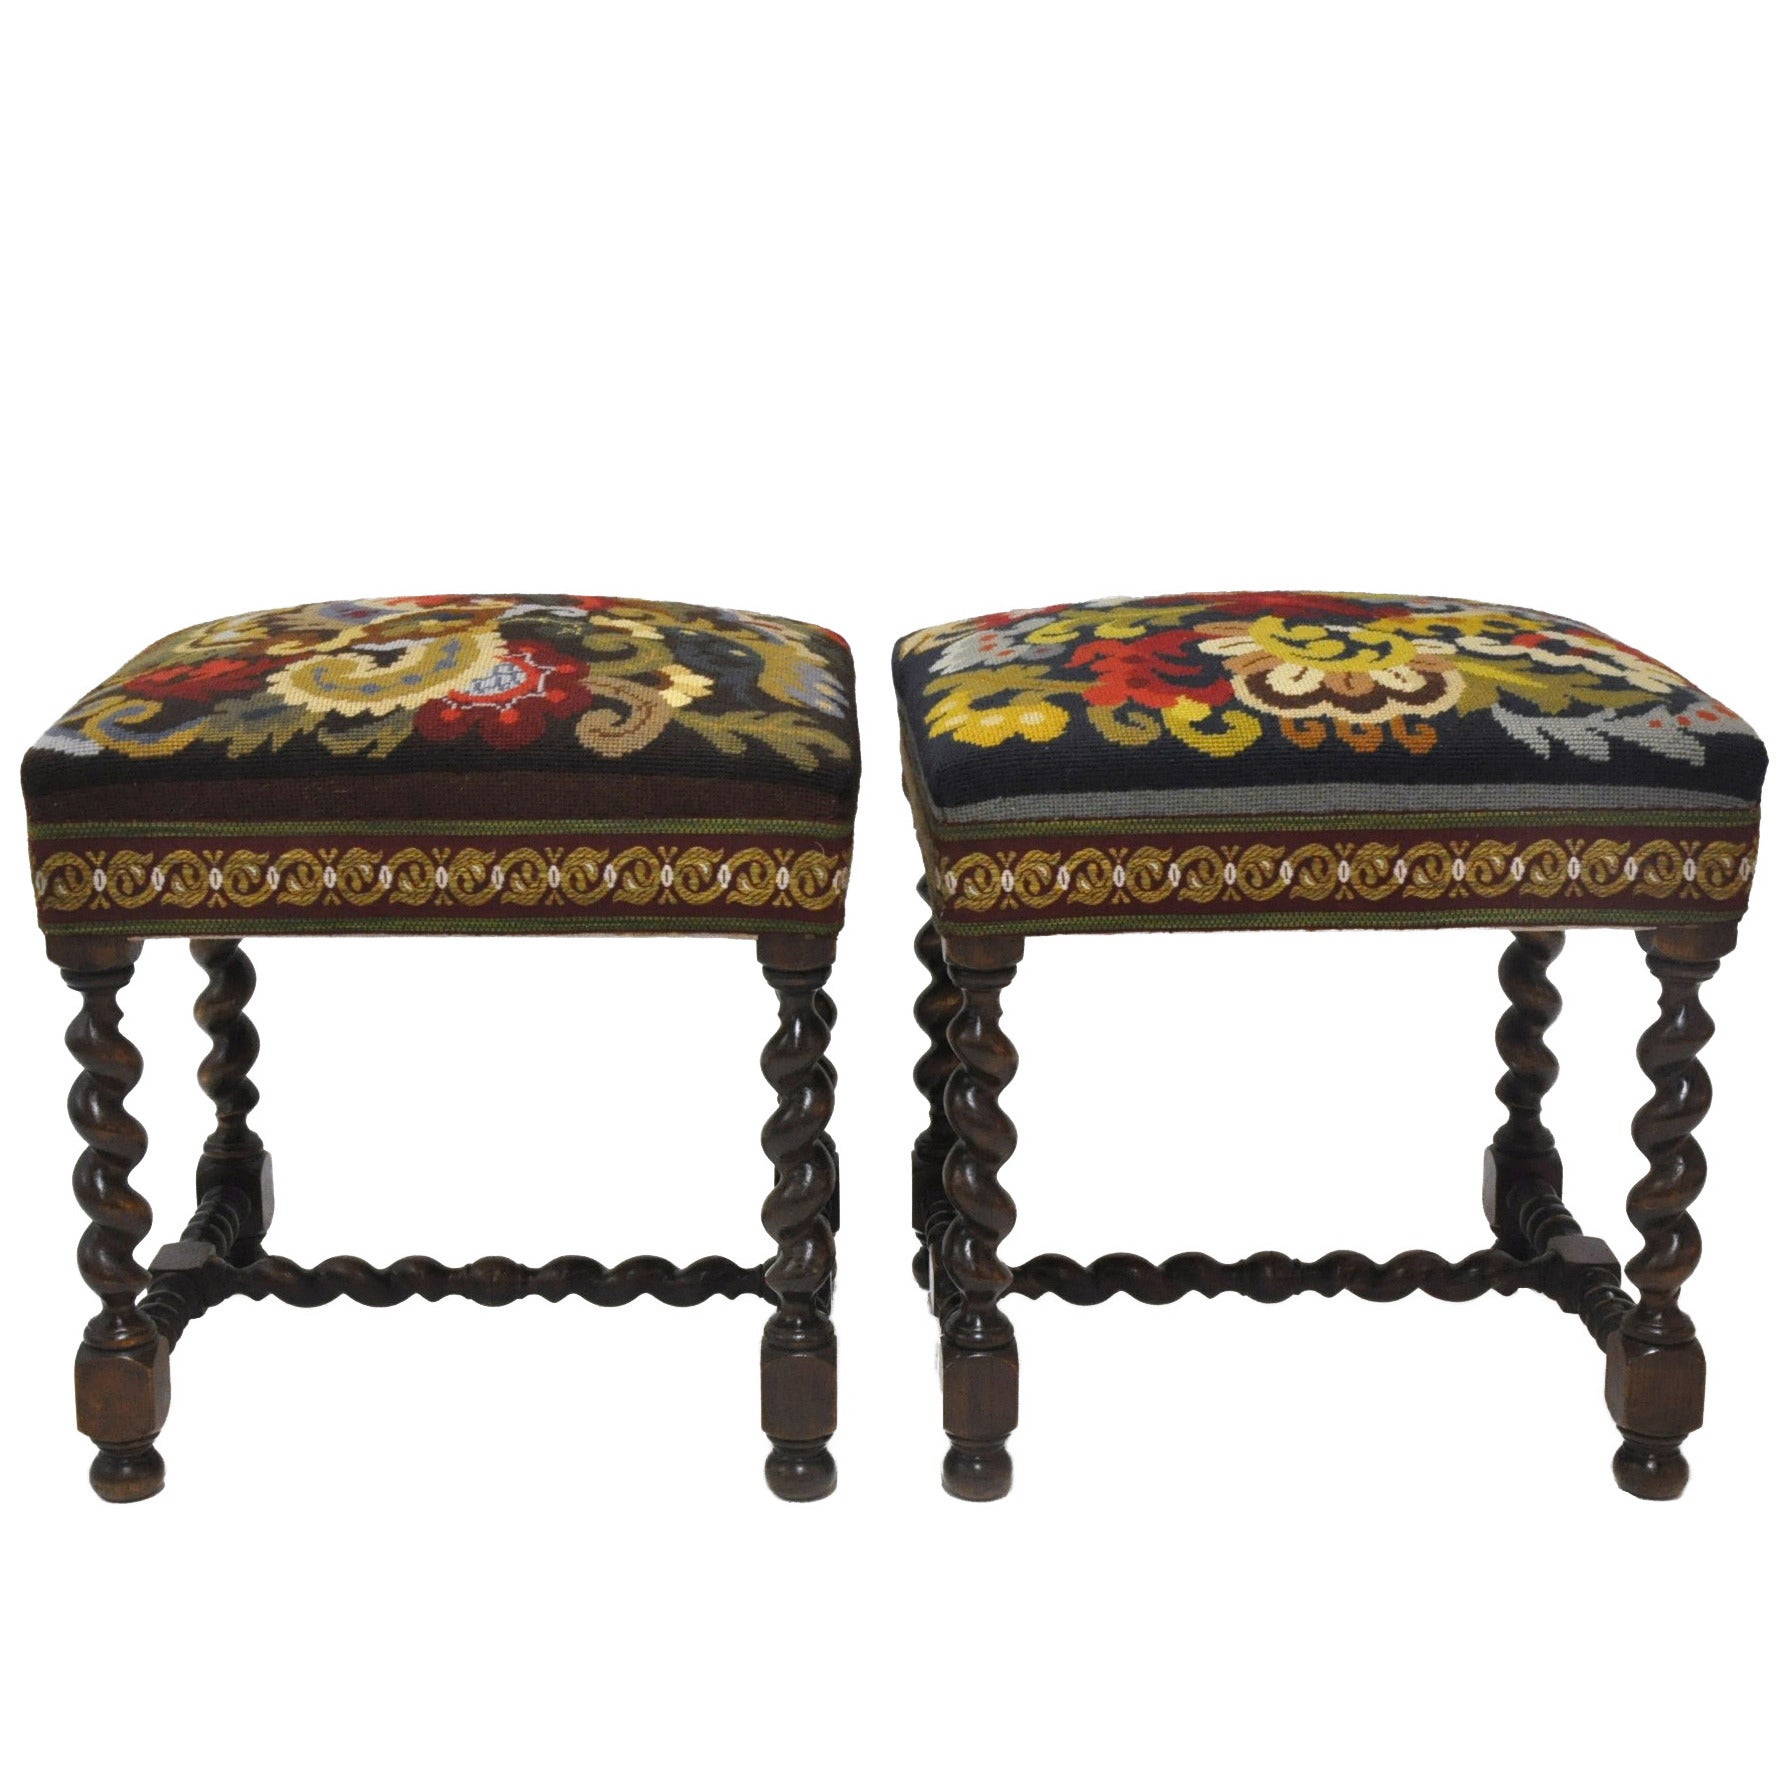 Pair of  Louis XIII Antique Walnut Barley Twist Stools with Needlepoint Tapestry